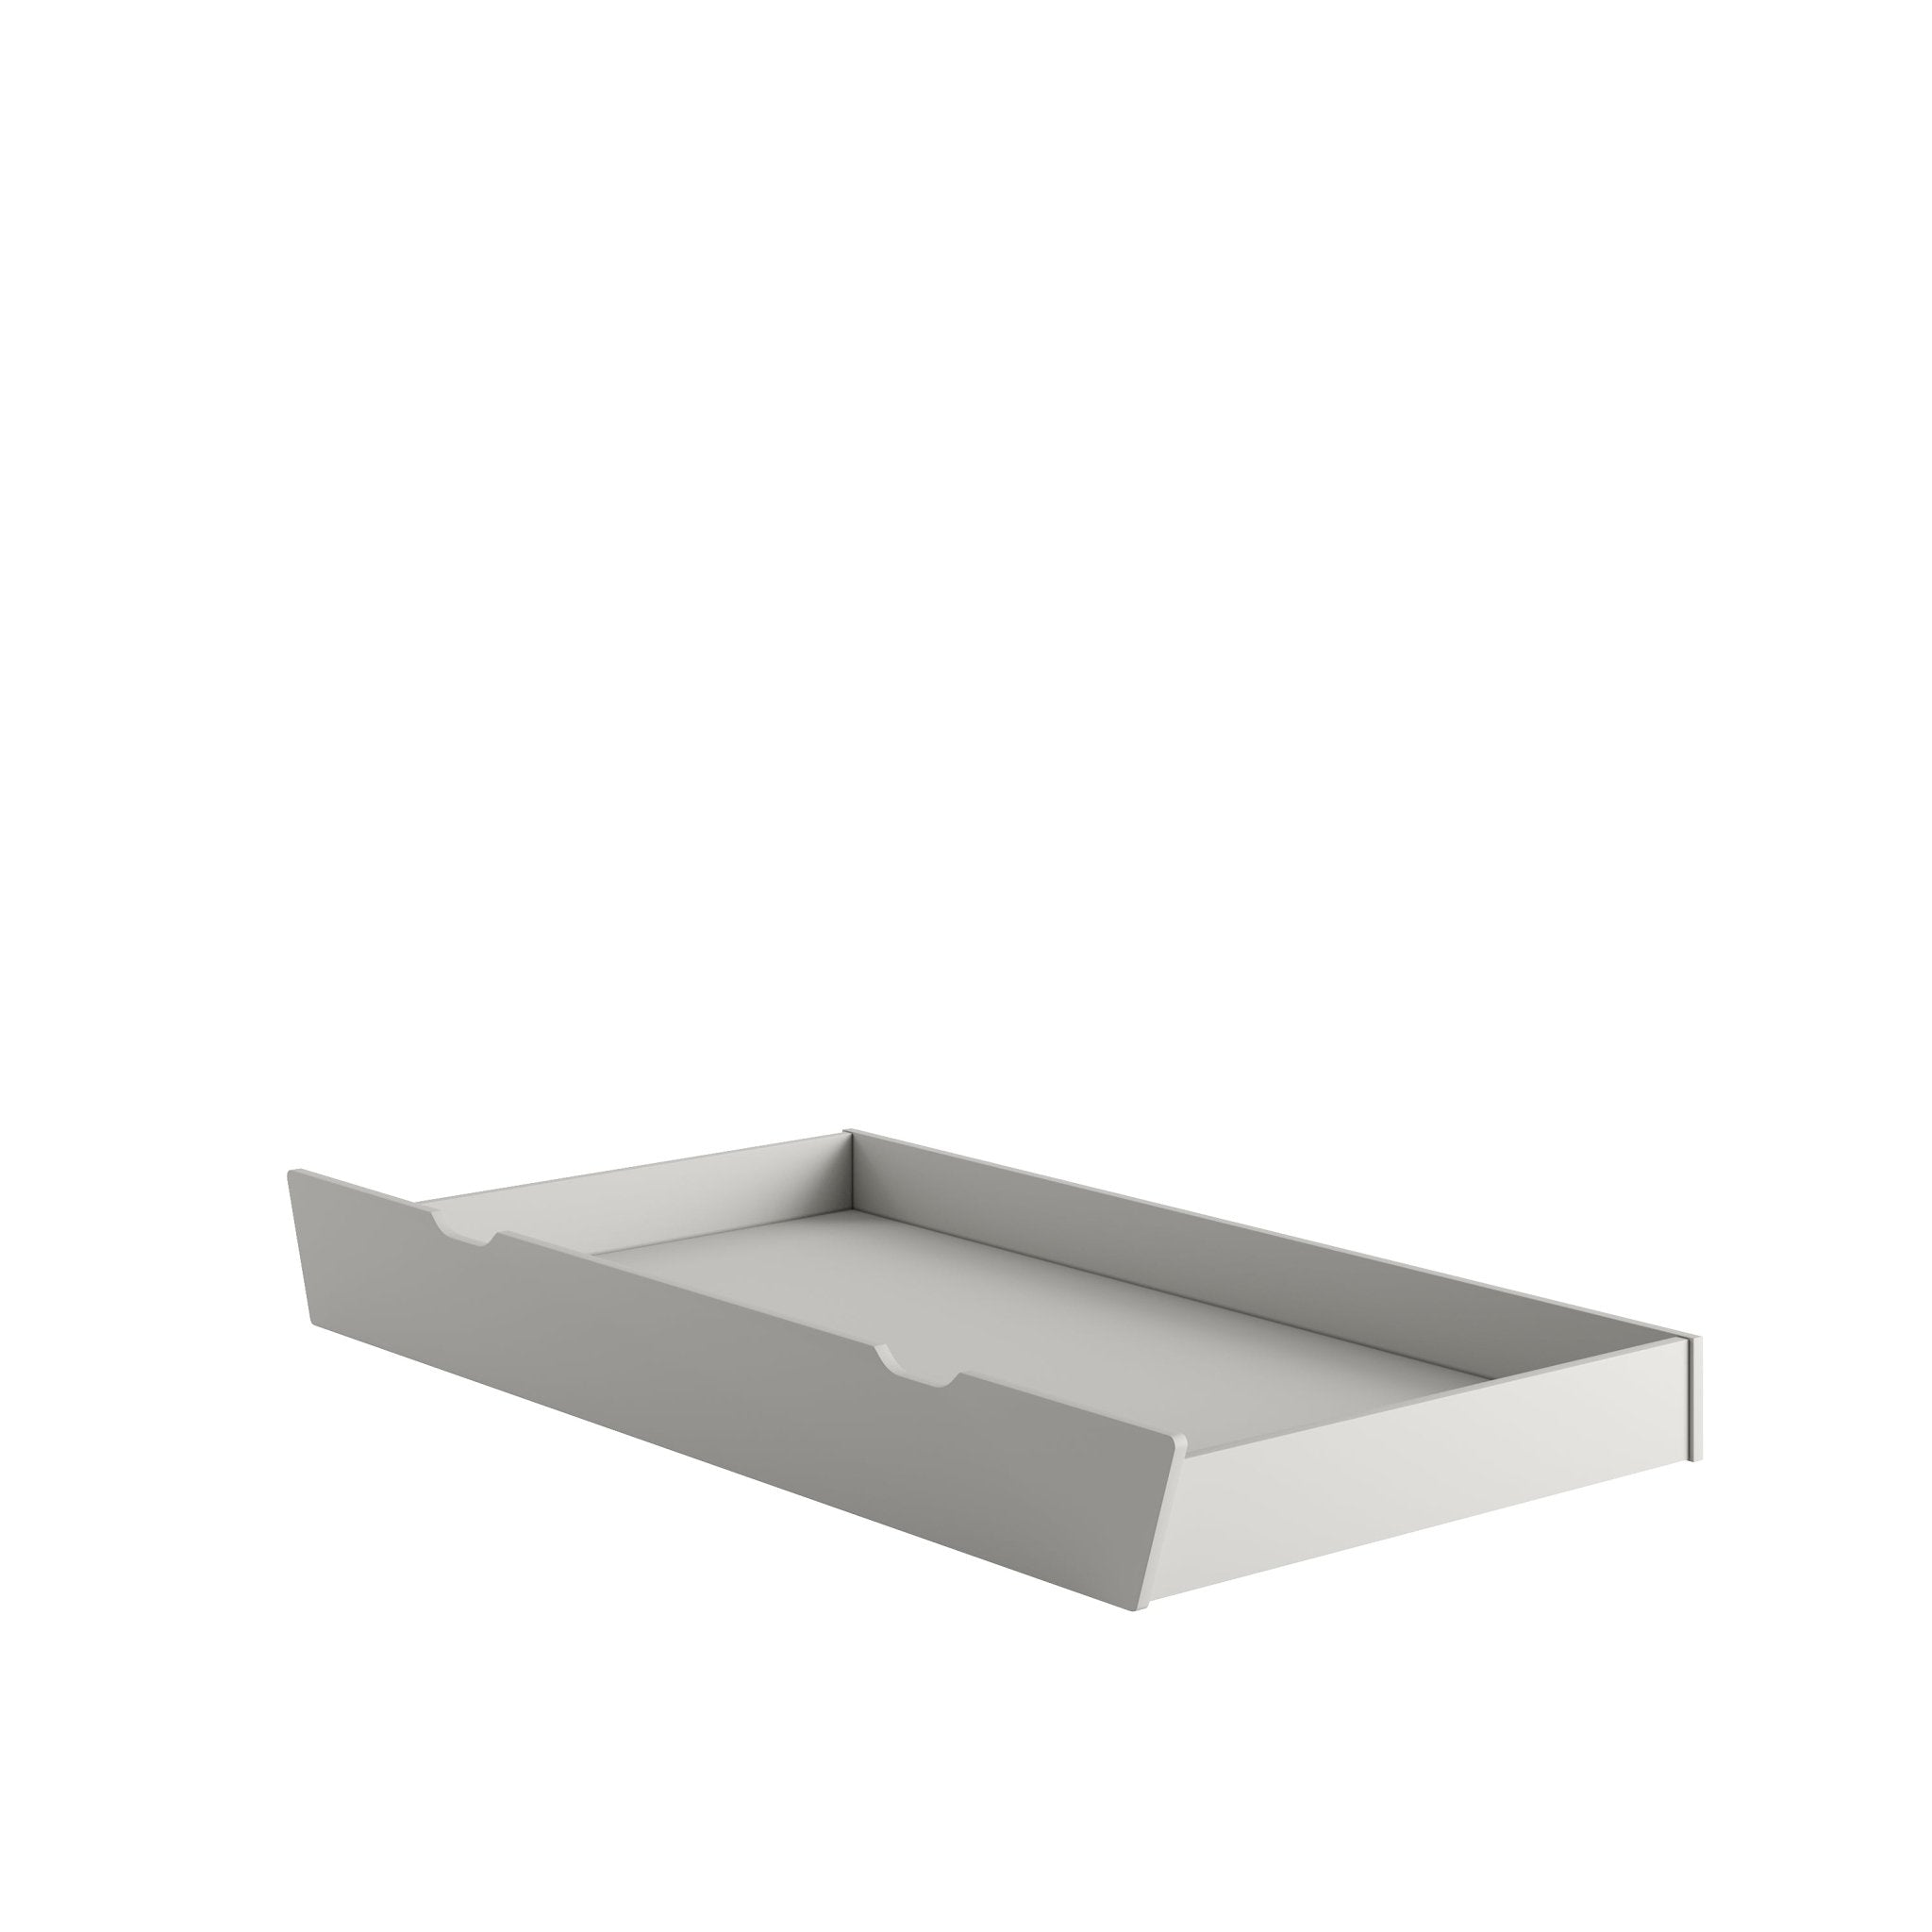 Saga under bed drawer to 200 x 90 cm and 200 x 120 cm grey color - Scandinavian Stories by Marton